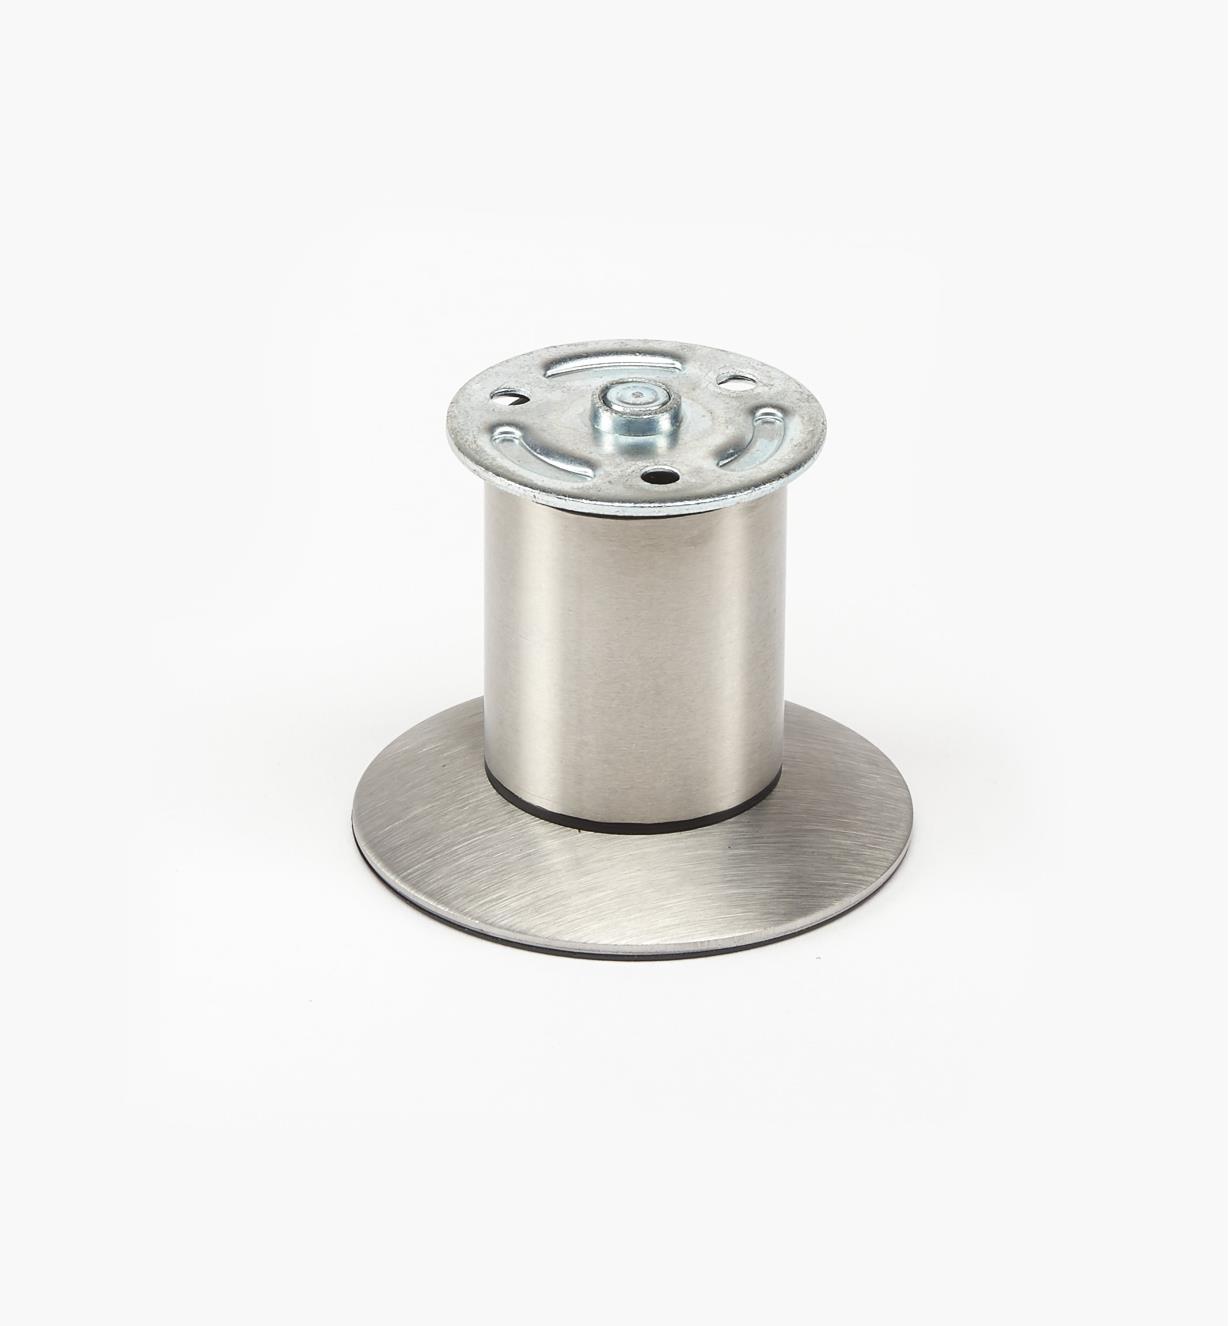 00S8145 - Stainless-Steel Furniture 60mm (2 1/4") Leg